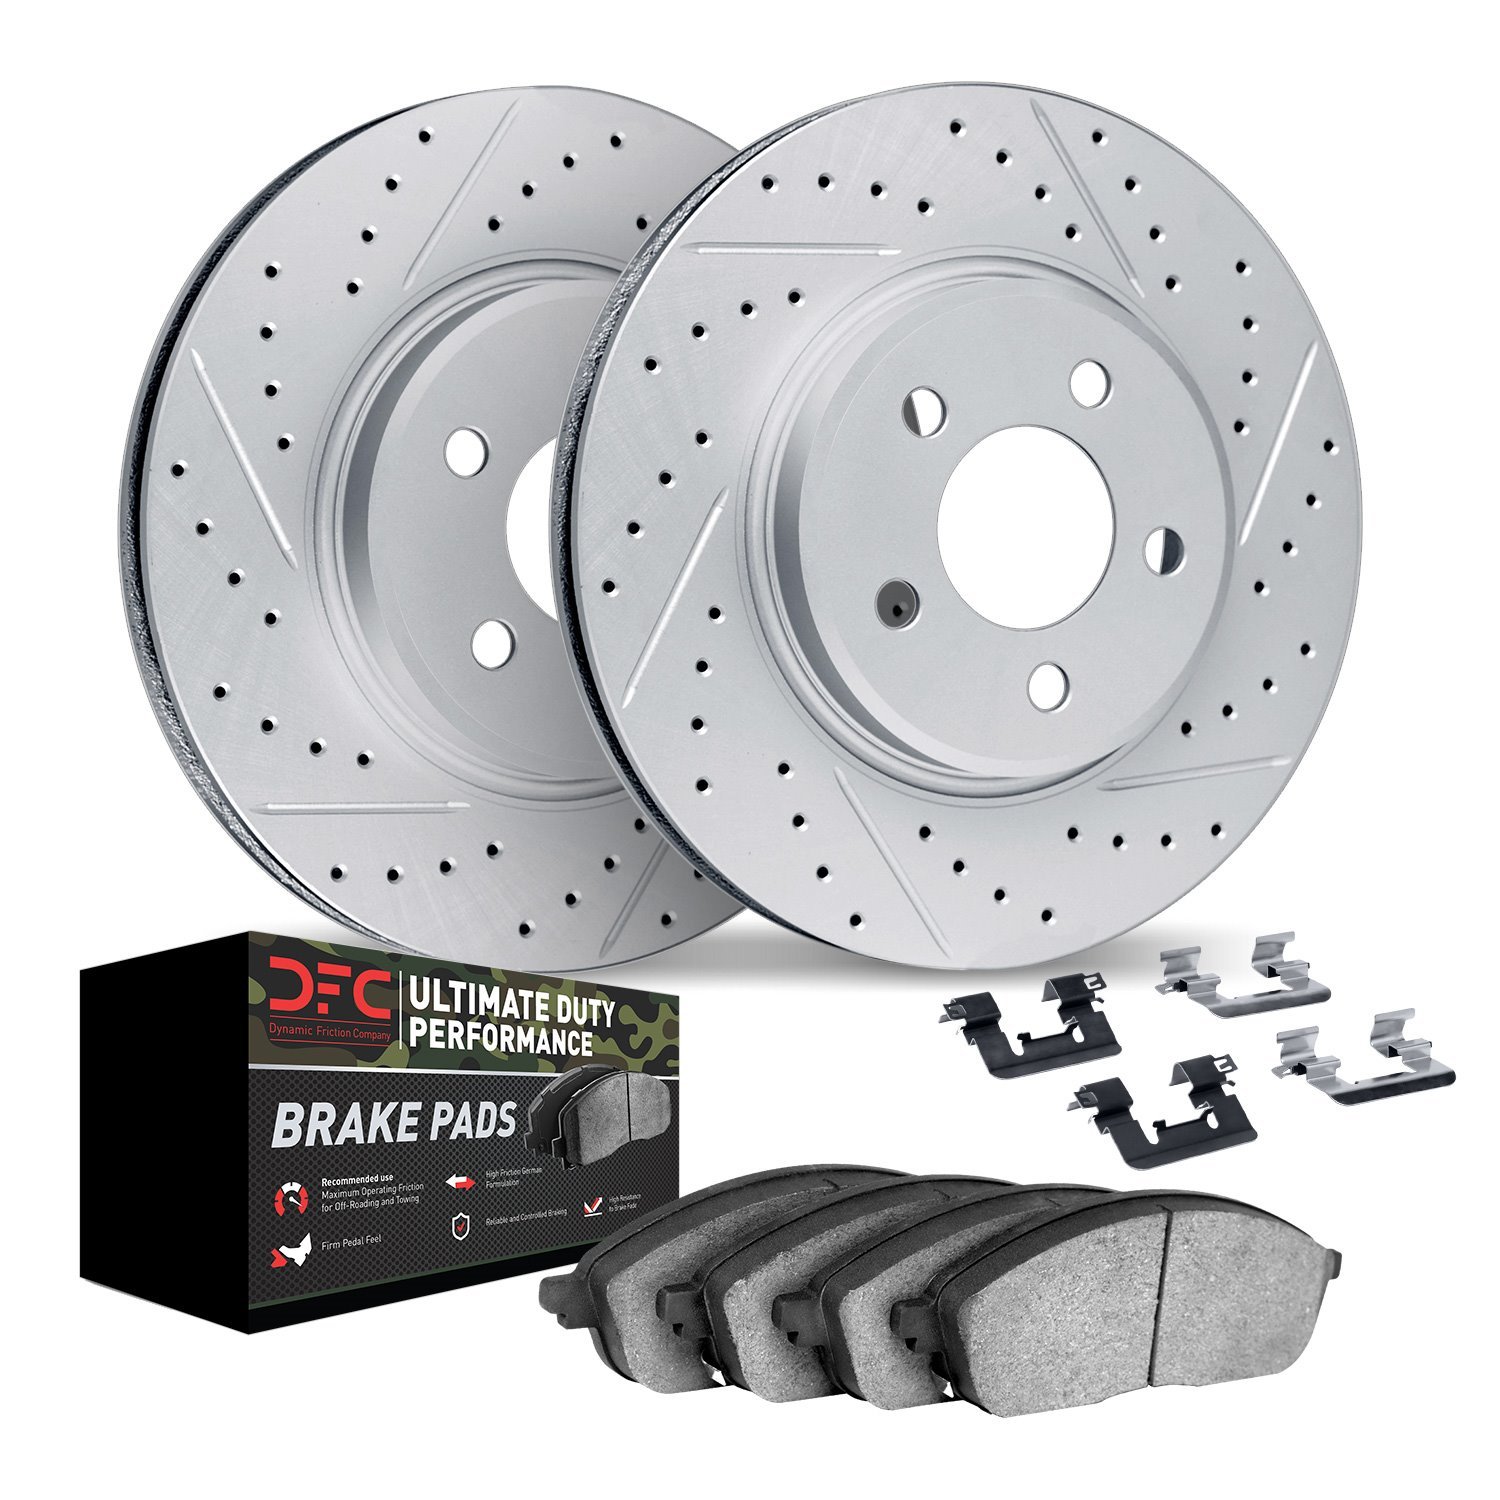 2412-40017 Geoperformance Drilled/Slotted Brake Rotors with Ultimate-Duty Brake Pads Kit & Hardware, 2008-2016 Multiple Makes/Mo